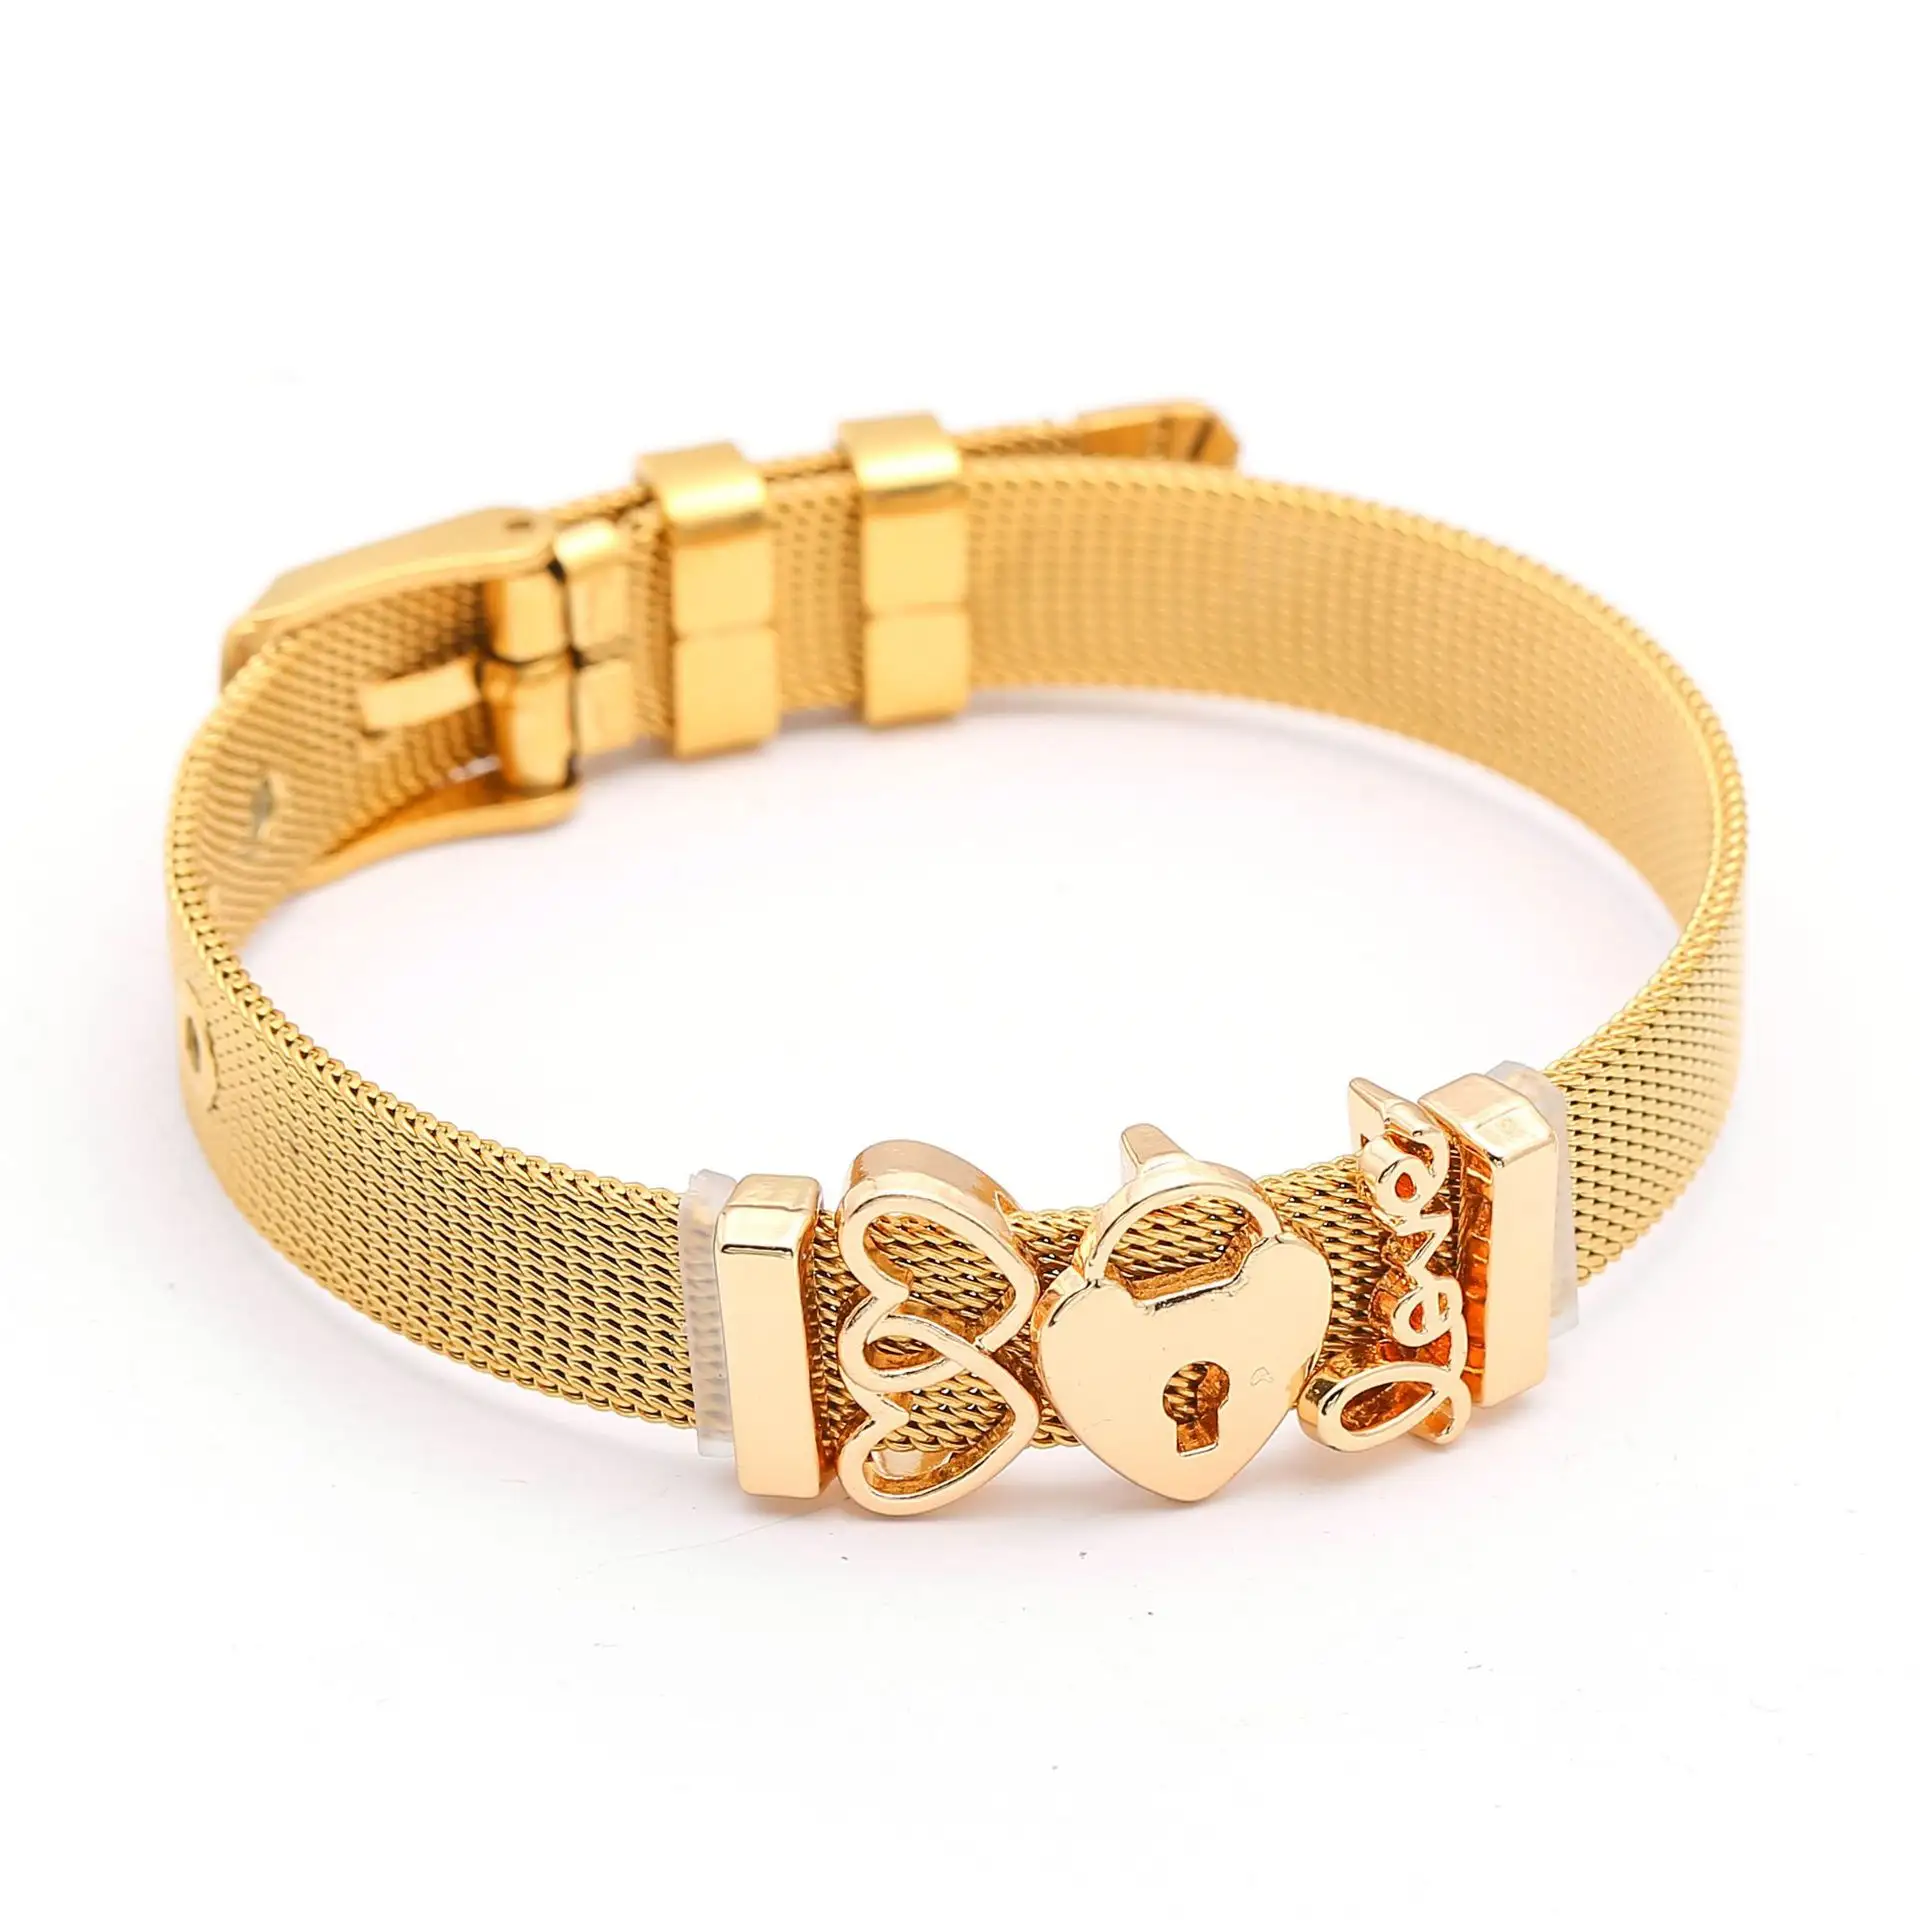 European Fashion DIY Heart Lock Bracelet Stainless Steel Gold Watch Band Bracelet For Couples Gifts